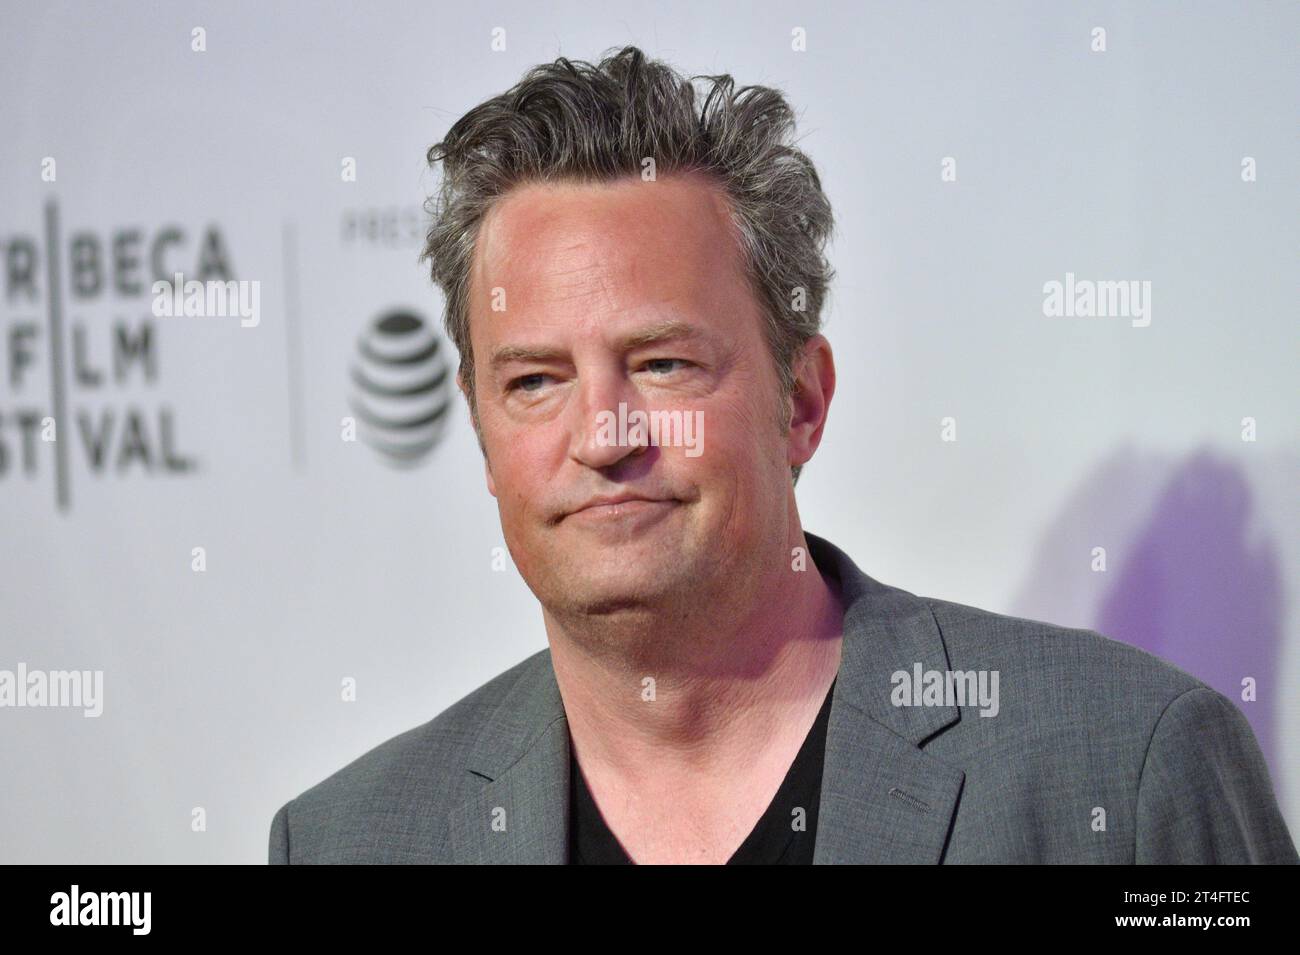 Matthew Perry attends "The Circle" screening during the 2017 Tribeca Film Festival at BMCC Tribeca PAC on April 26, 2017 in New York City. Stock Photo